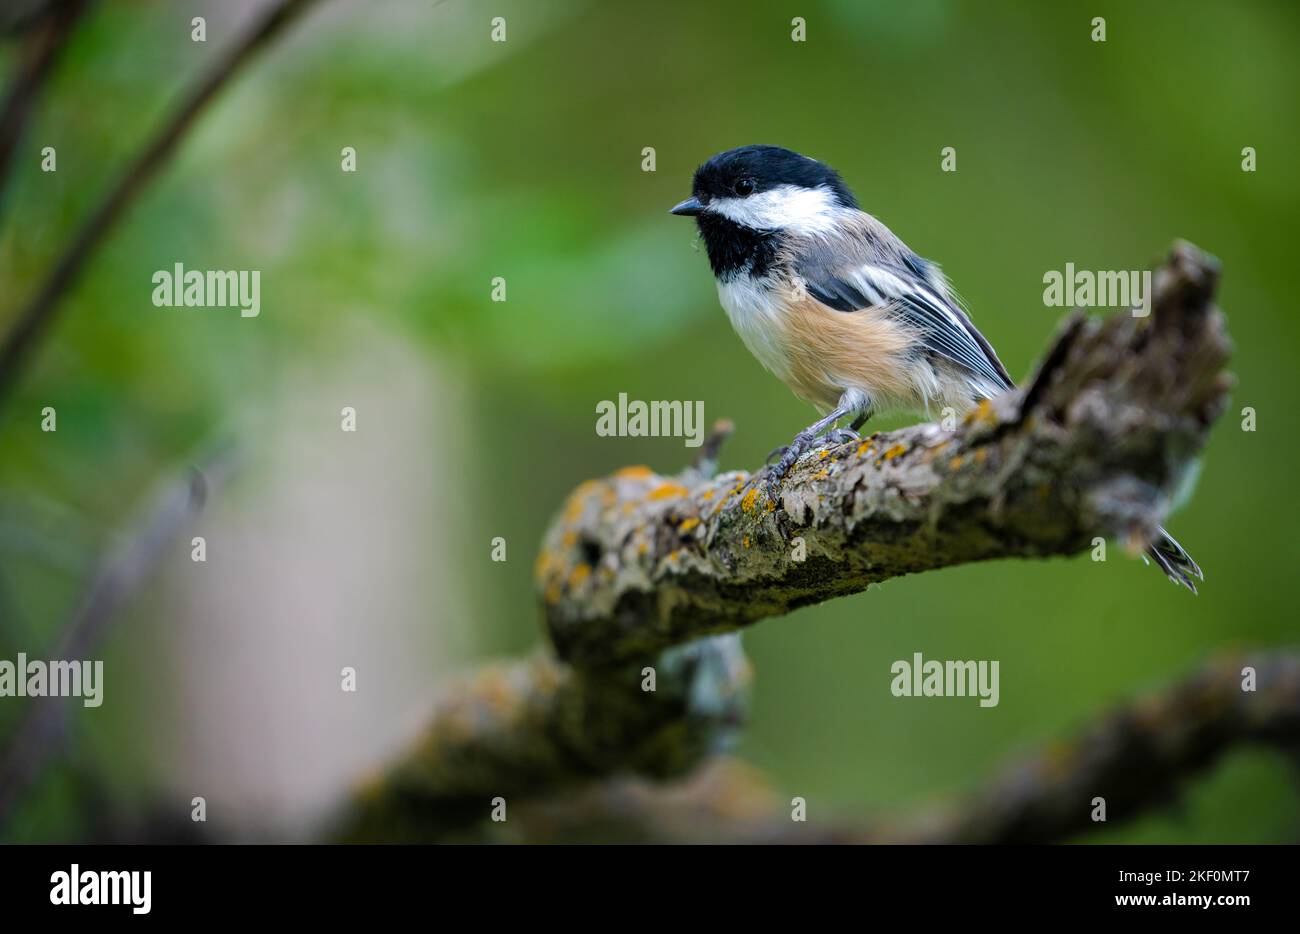 Black-capped chickadee bird on branch with green background Stock Photo